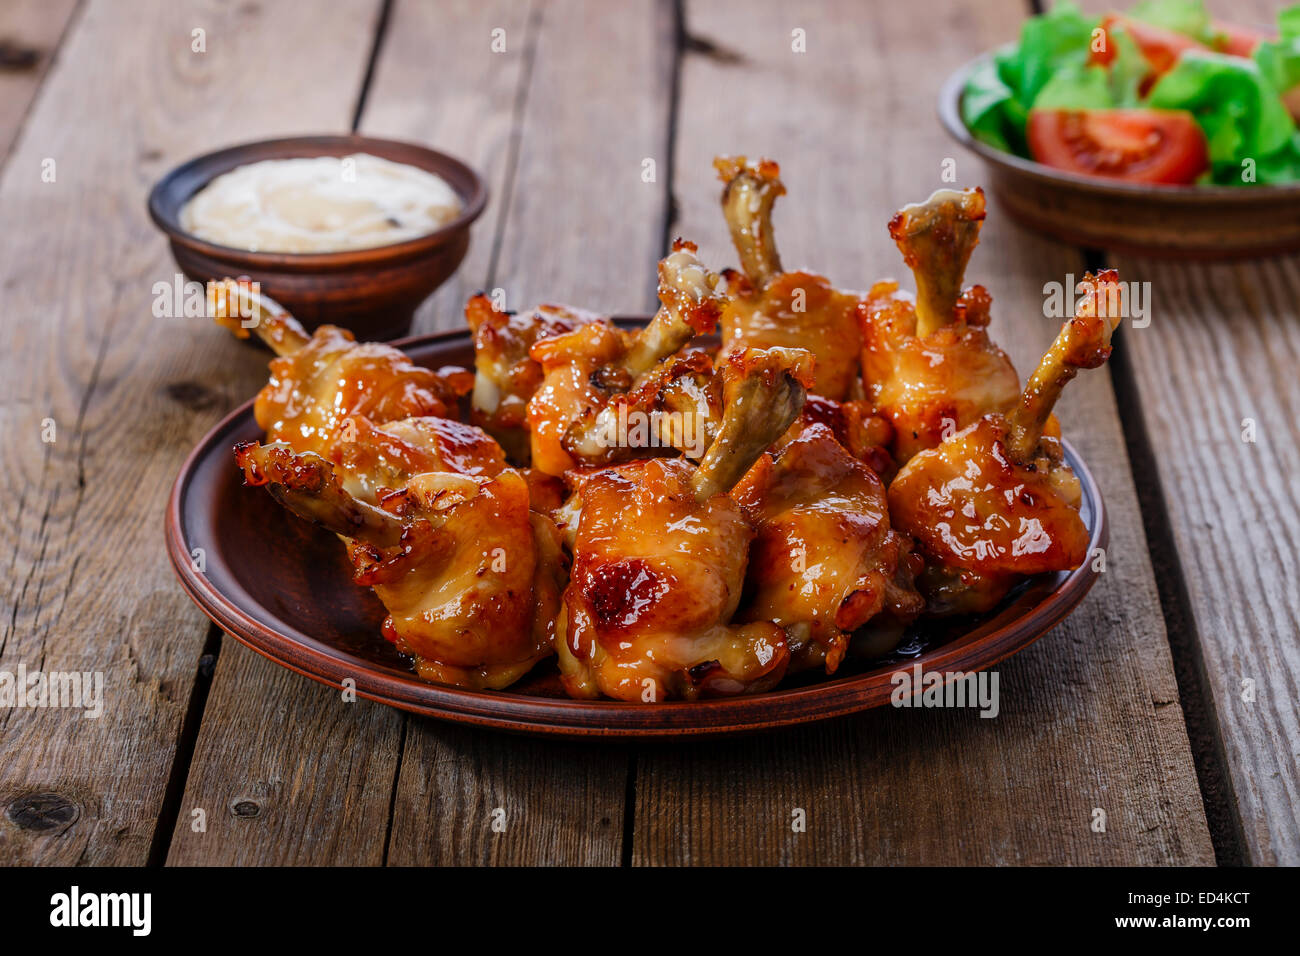 honey glazed chicken wing with sauce Stock Photo